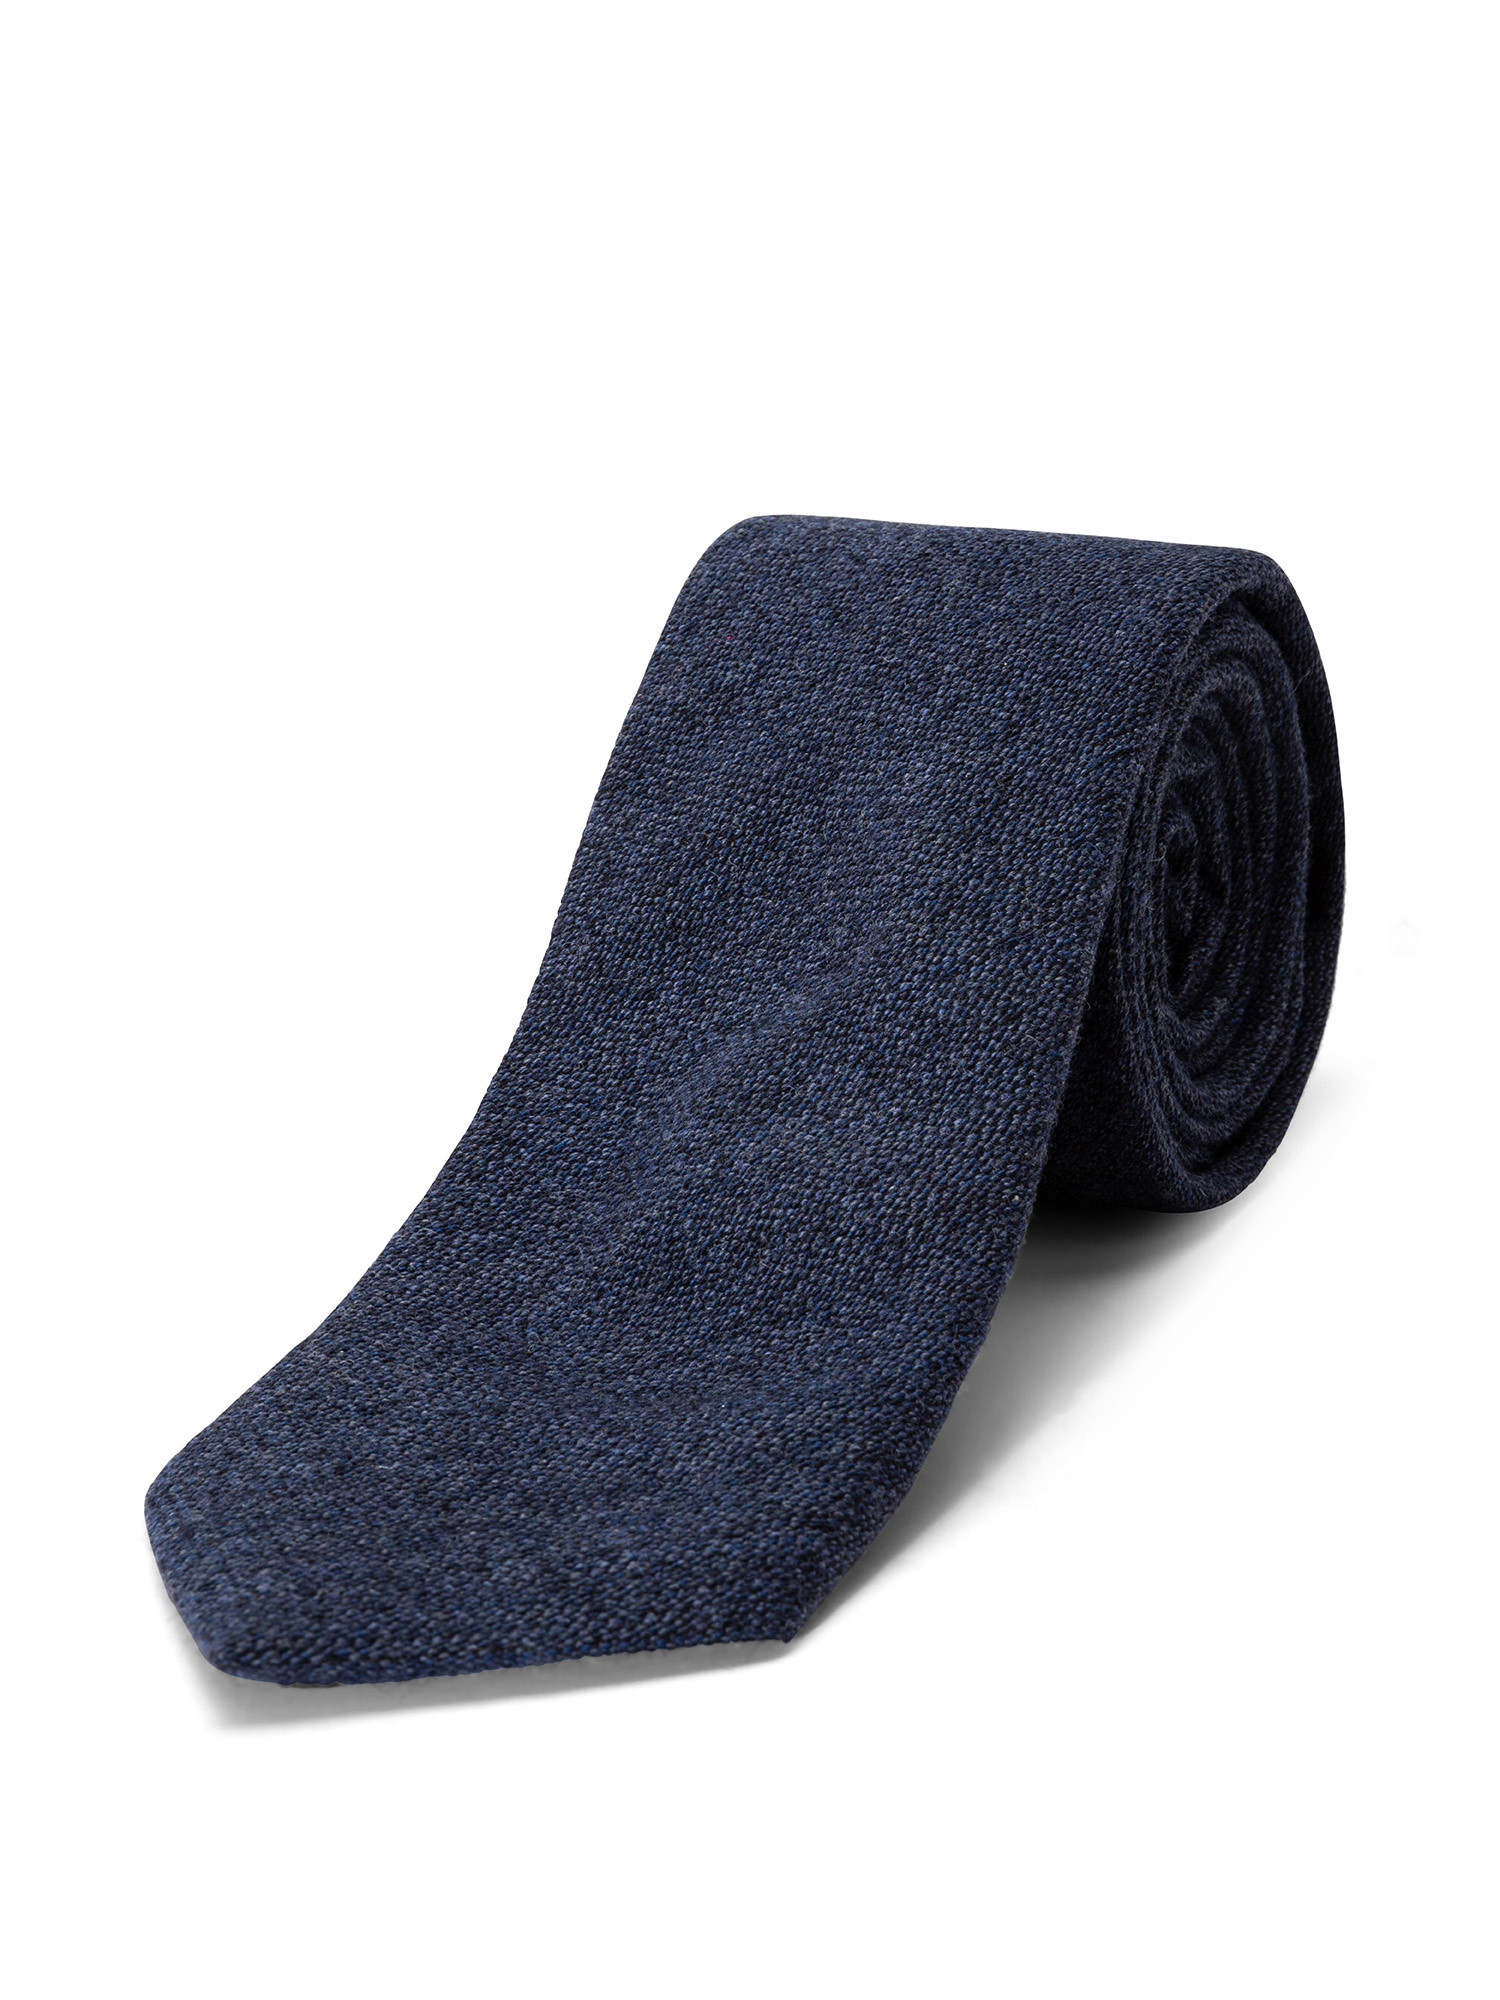 Luca D'Altieri - Patterned wool and silk tie, Blue, large image number 0